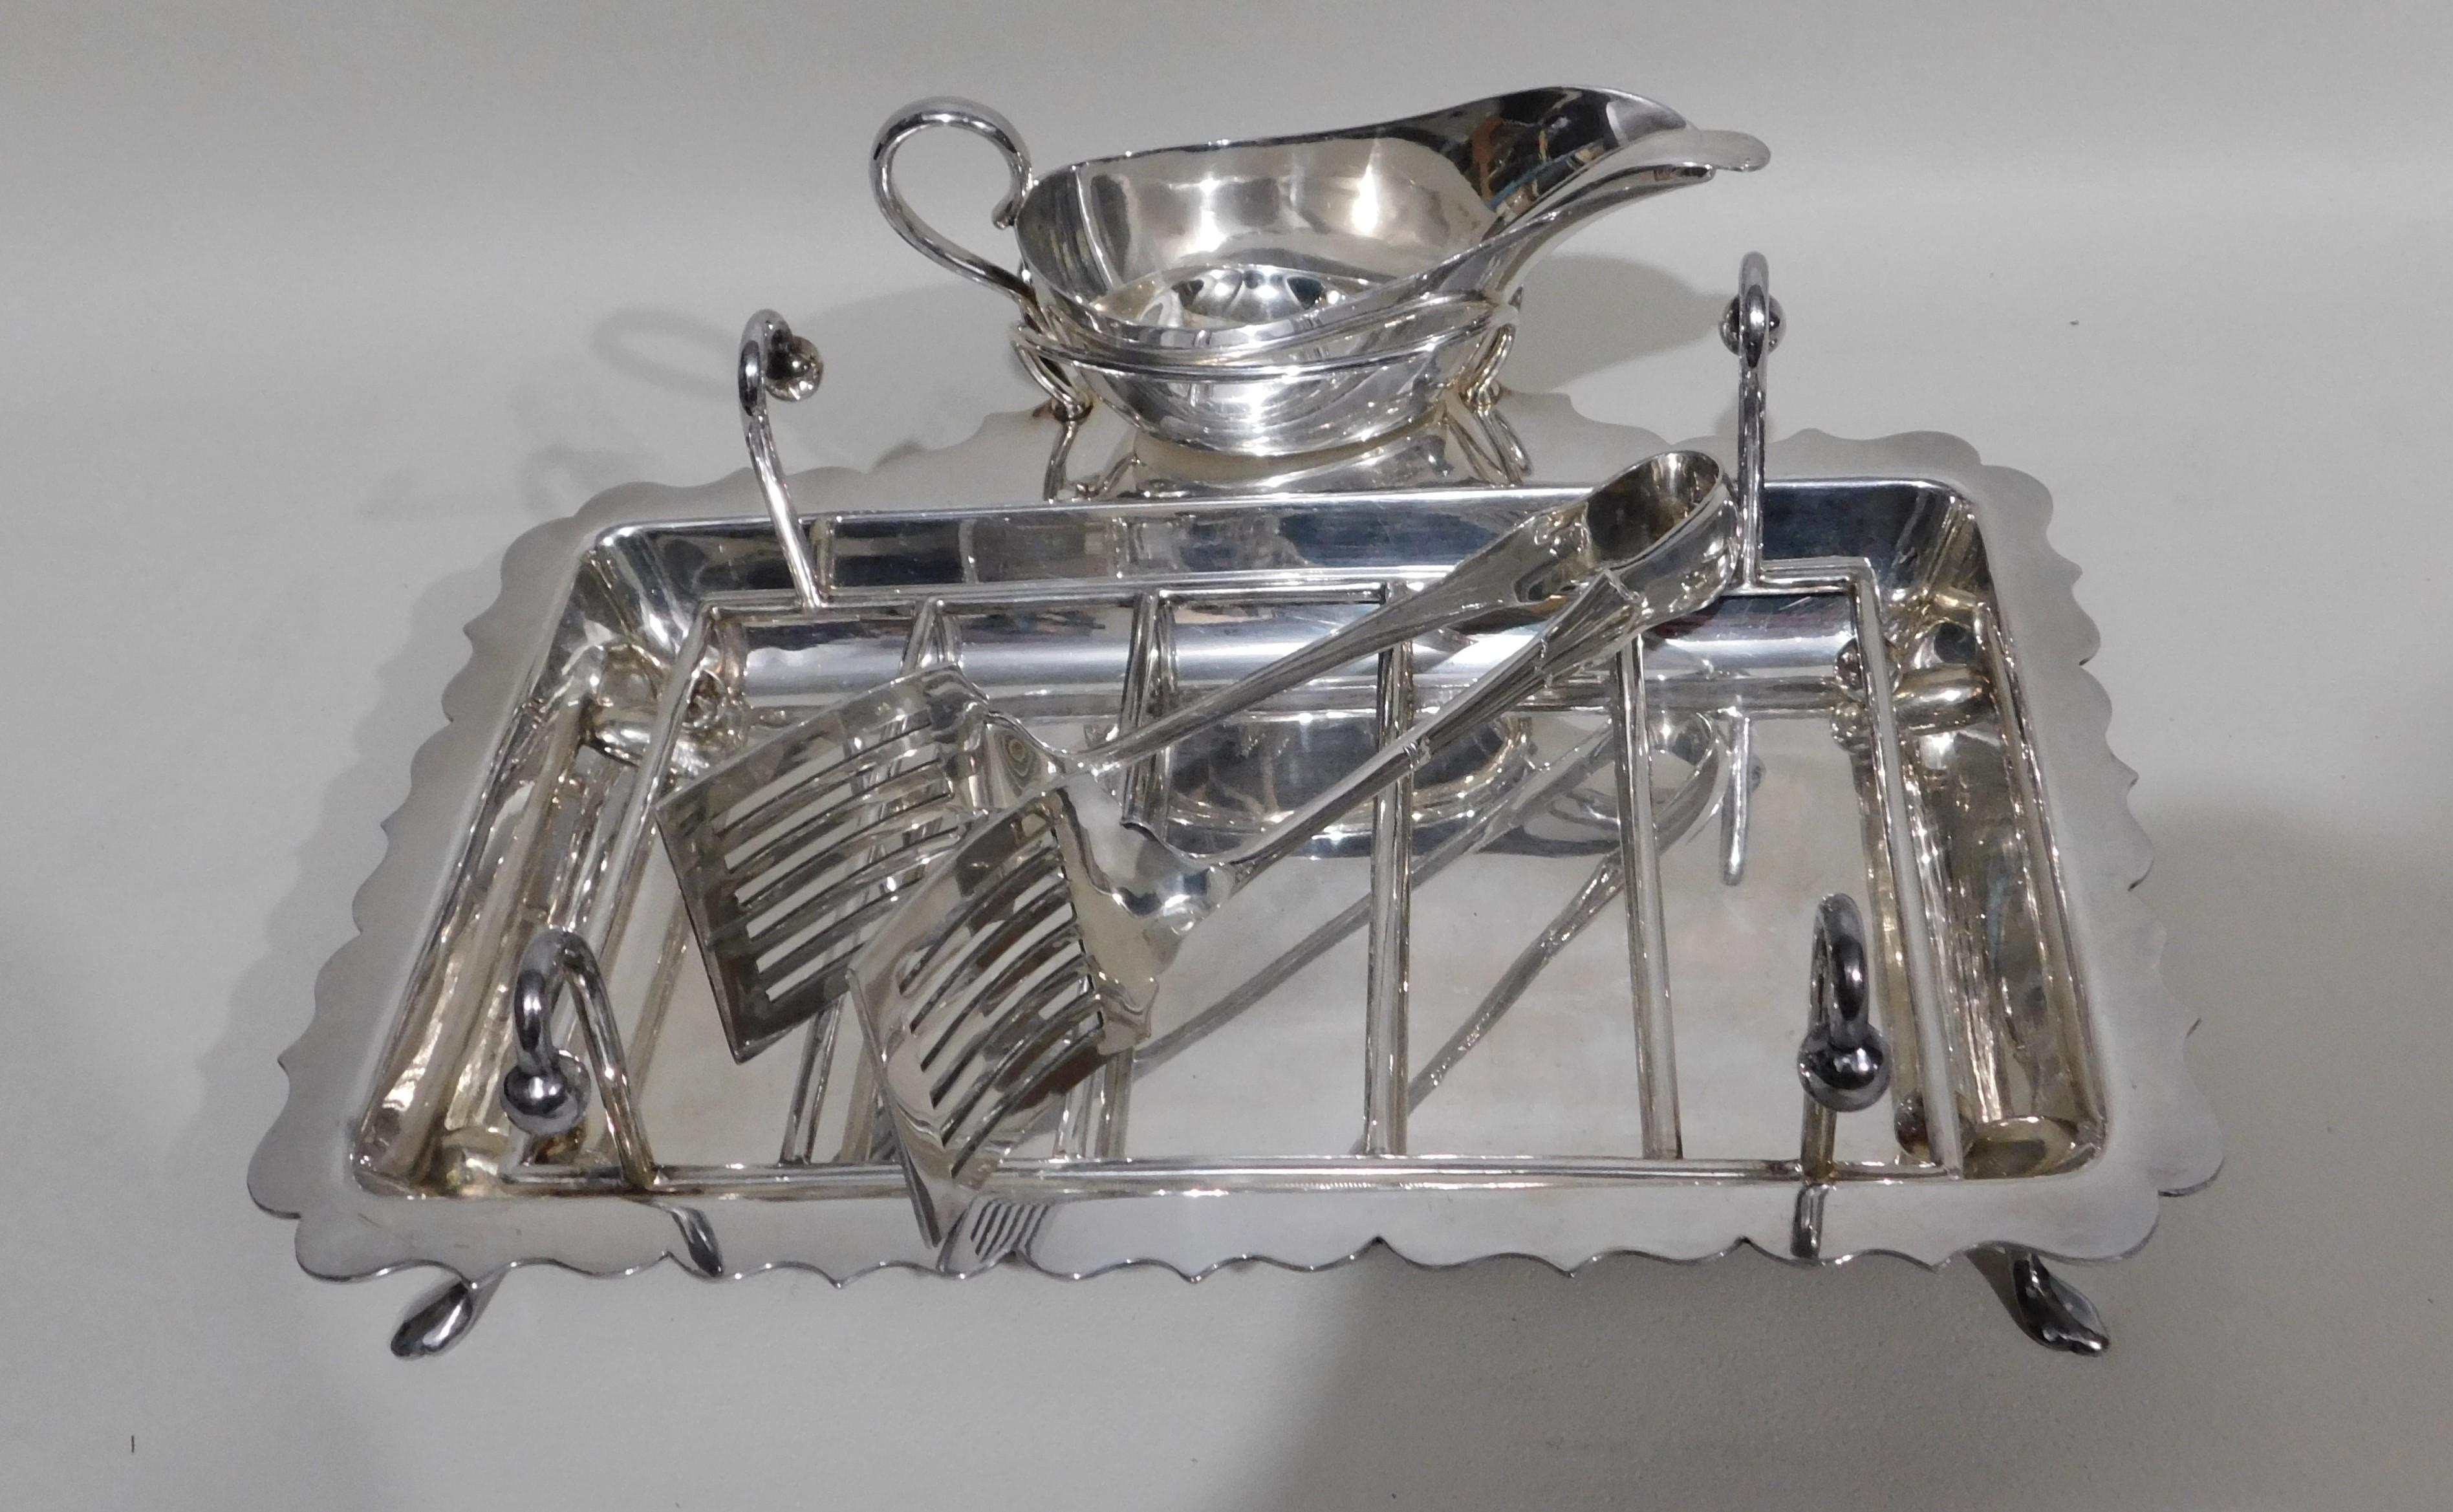 English five-piece silver plated asparagus serving set, having a plain rectangular body, a wire-work serving rack, a sauce boat sat in a frame with loop handle for hollandaise sauce or butter, a pair of asparagus server tongs, and all sitting on a